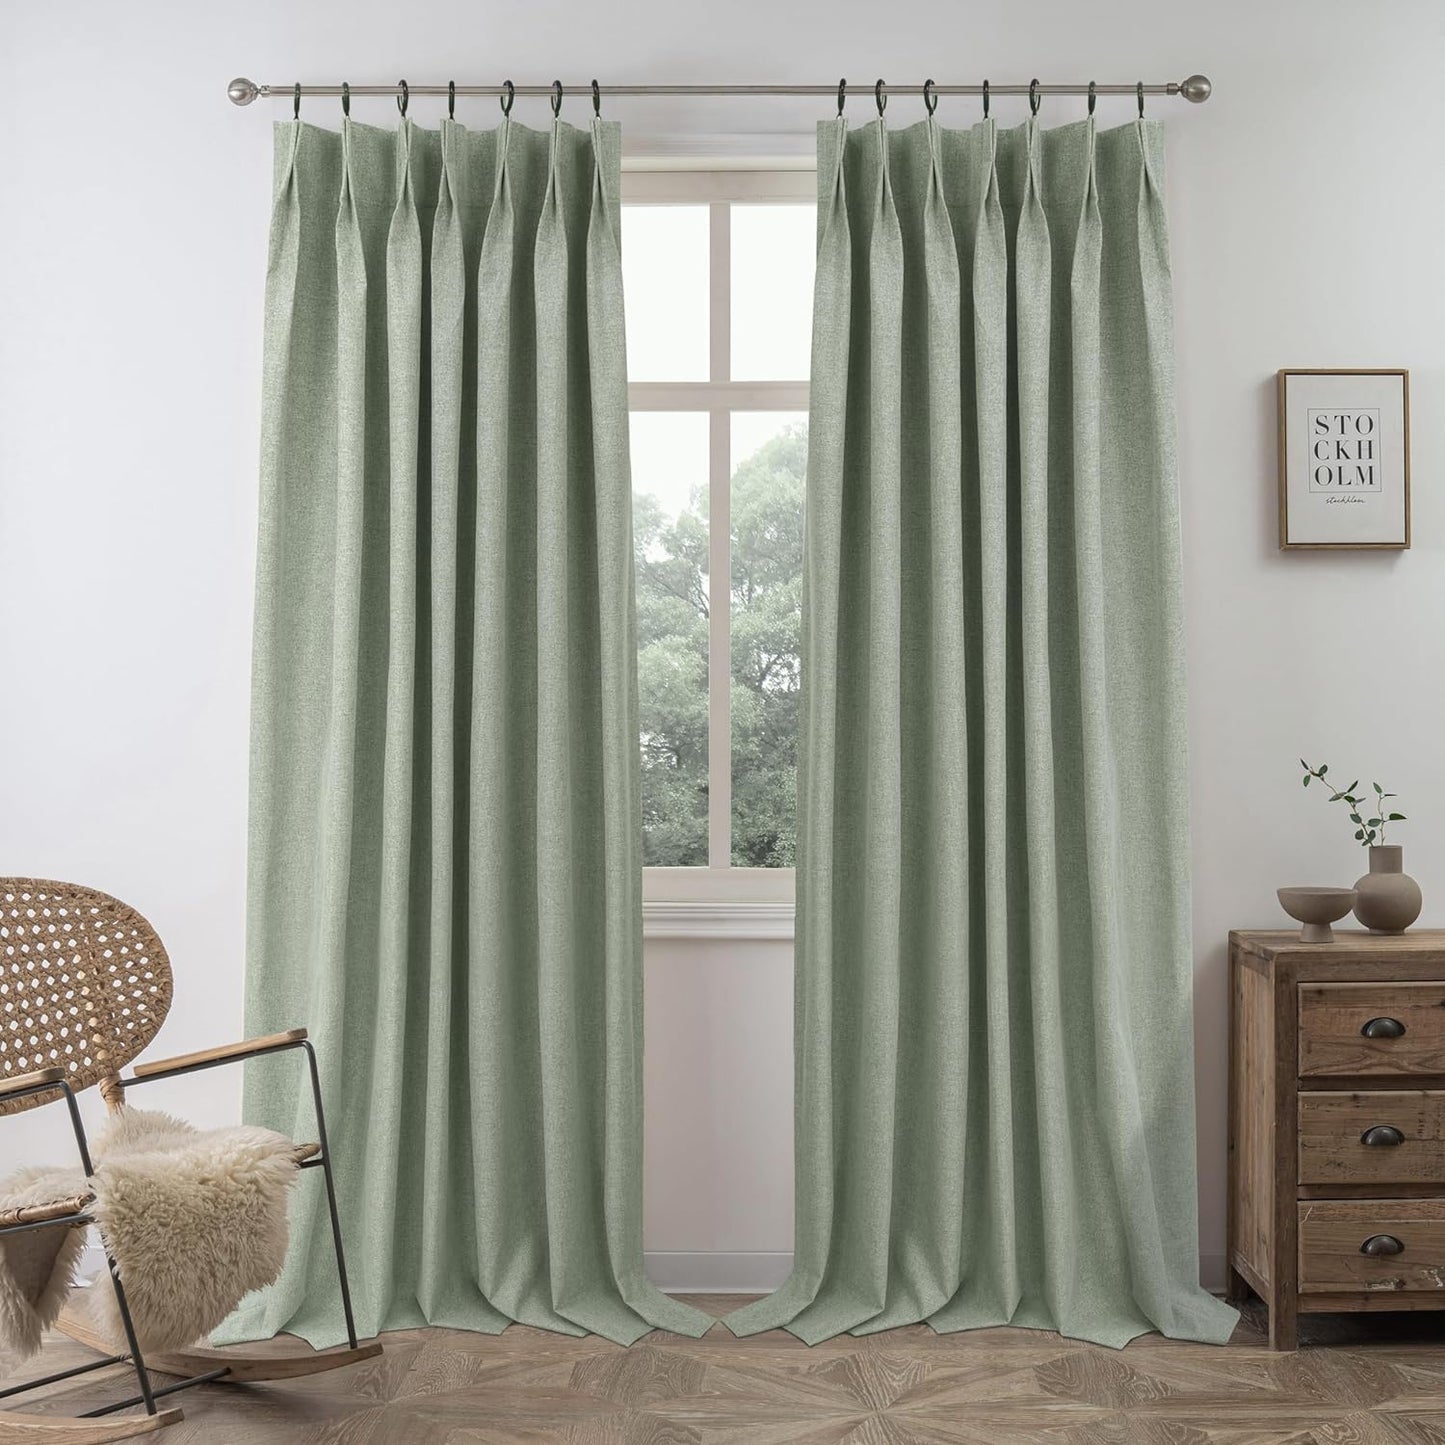 Driftaway 100% Blackout Natural Linen Curtains for Bedroom 96 Inches Long Double Layer Drape Farmhouse Thermal Insulated 3 Inch Rod Pocket Back Tab Full Light Blocking 2 Panels for Living Room Nursery  DriftAway Pinch Pleat Green 52"X84" 